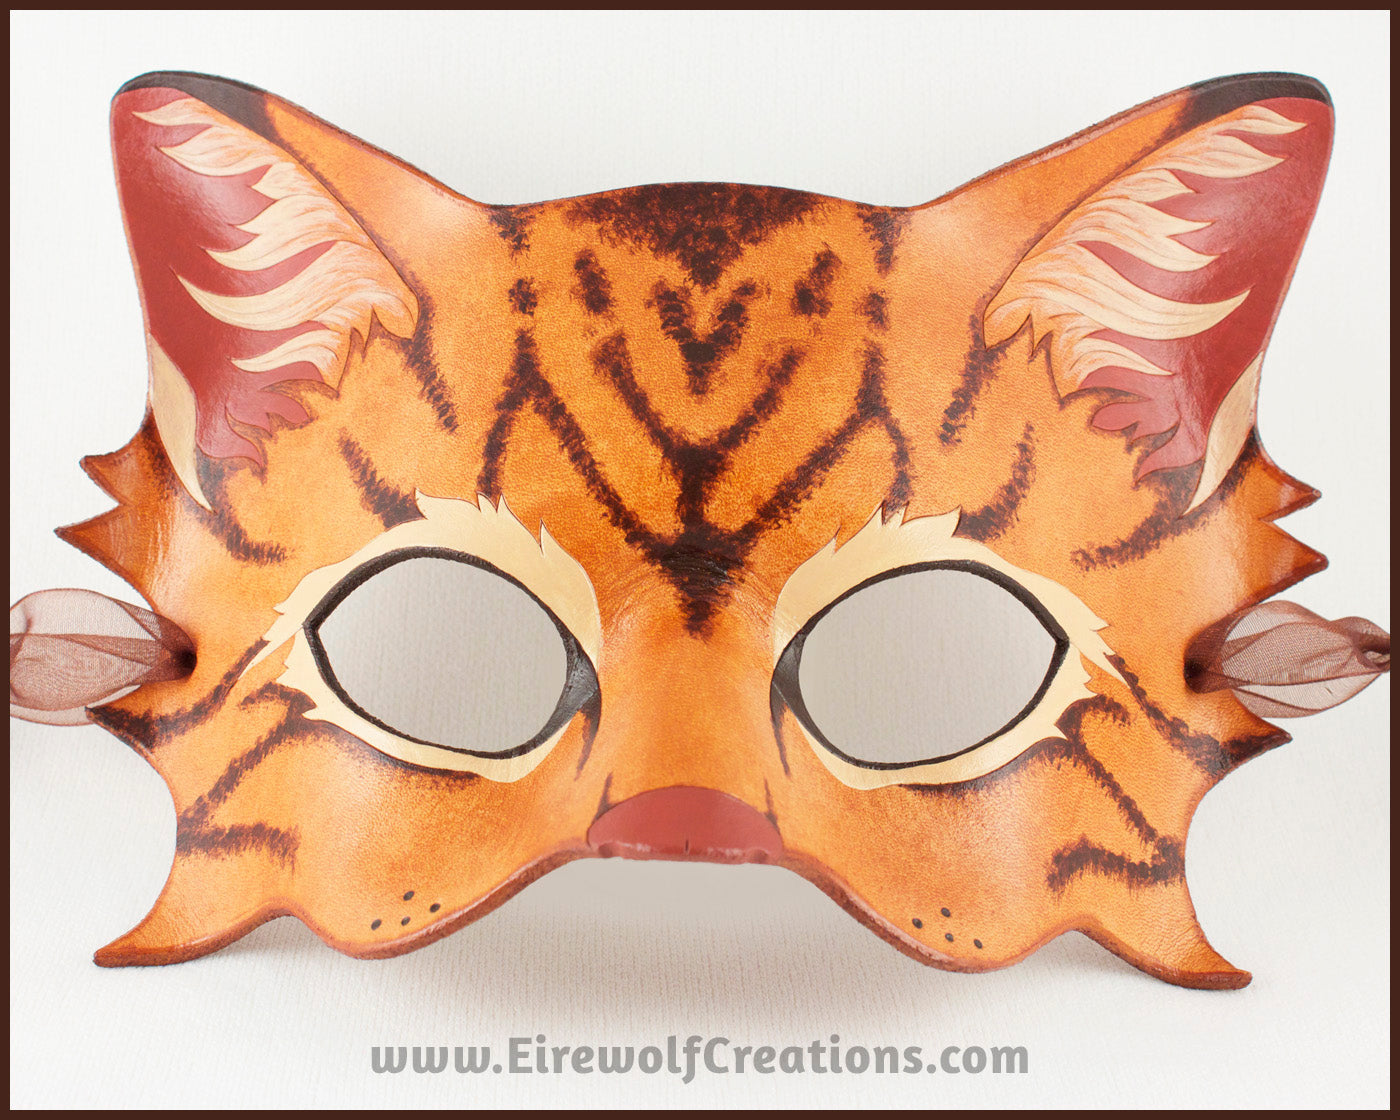 Lioness mask, handmade leather lion wild cat mask for Halloween